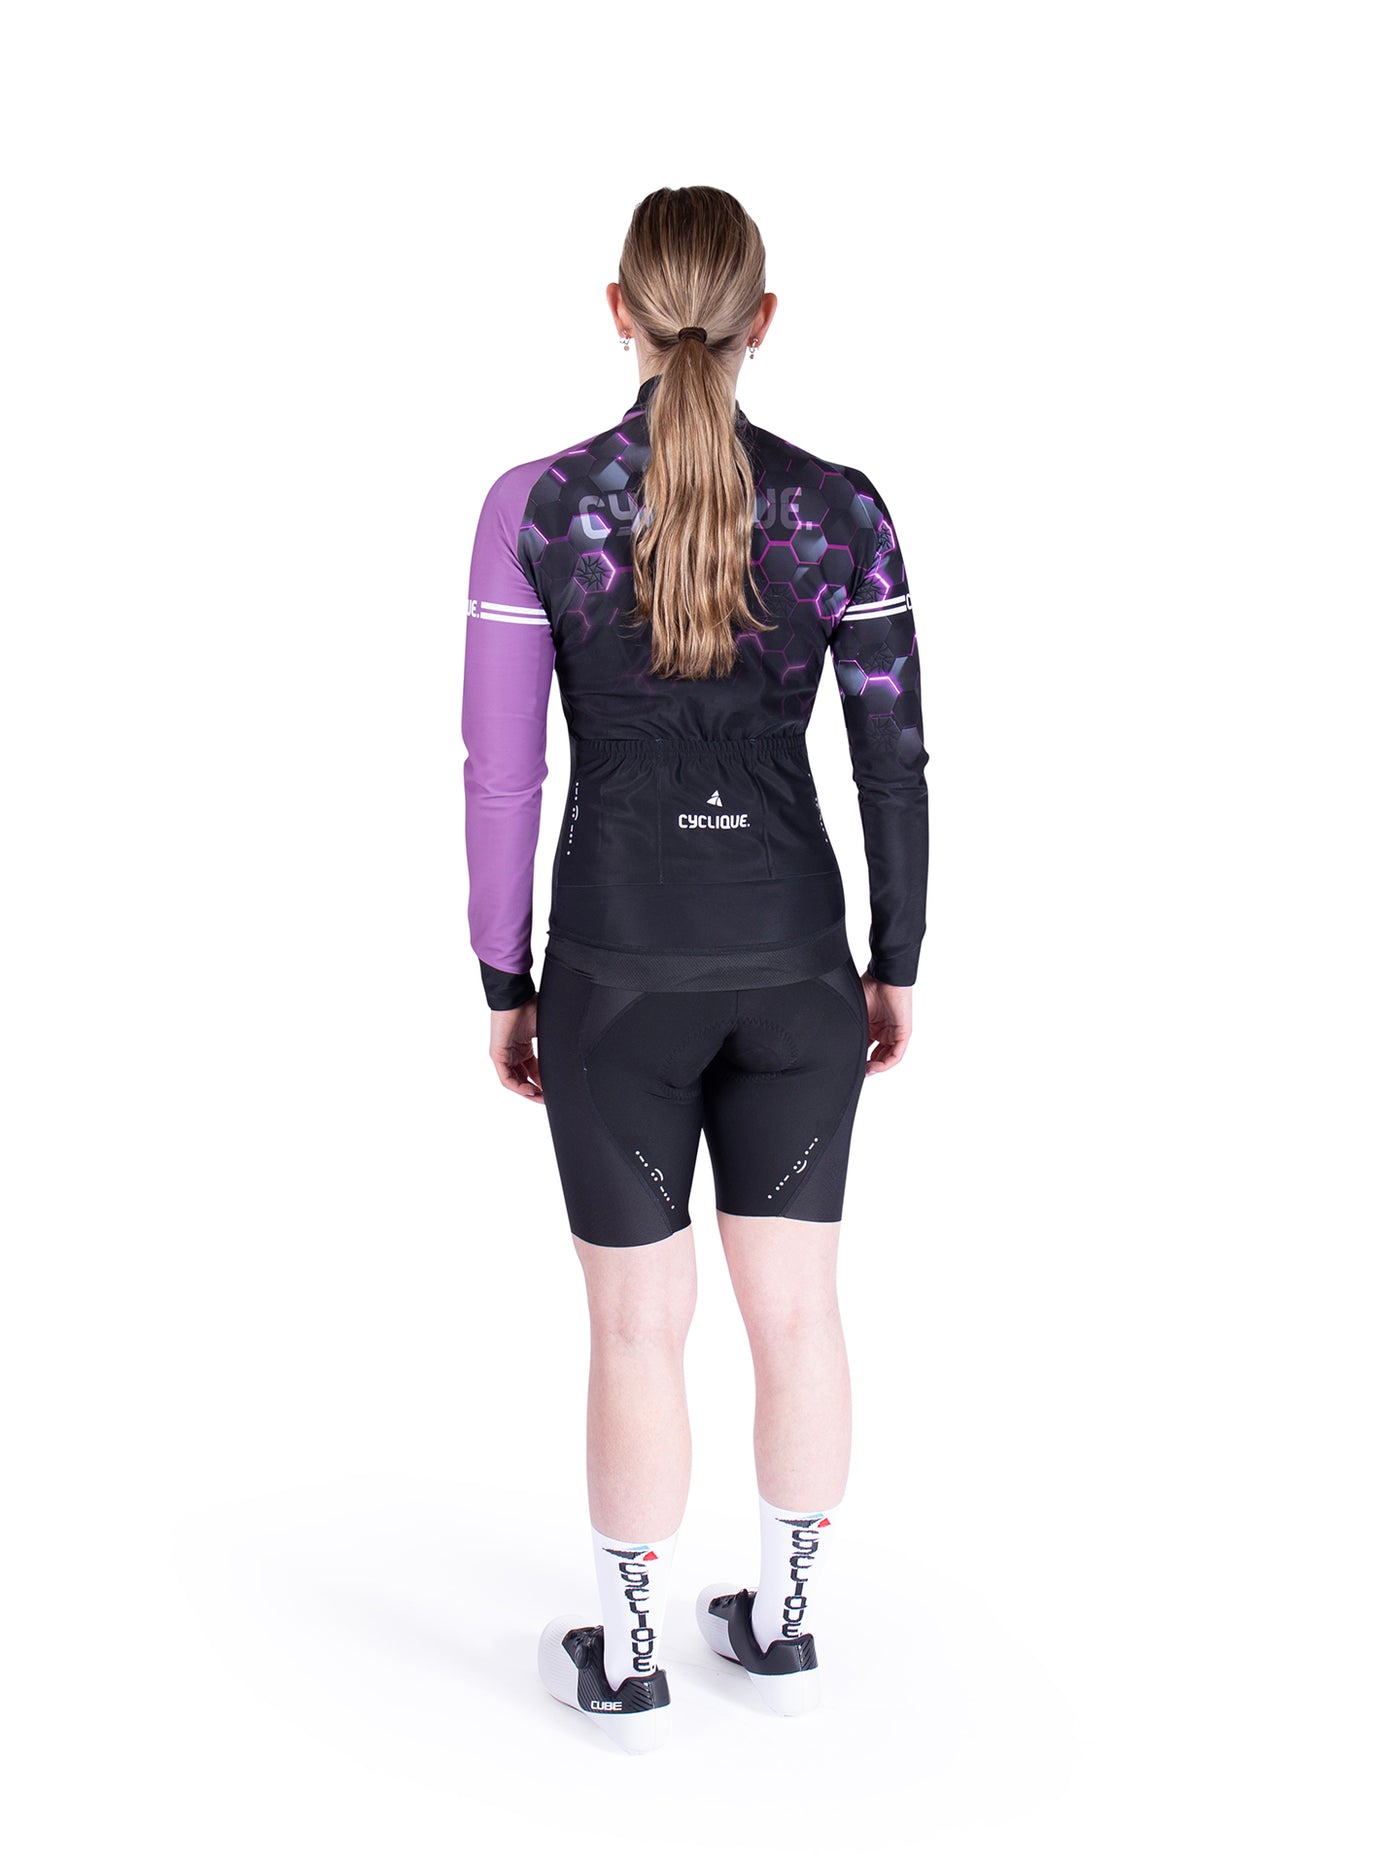 CompetiQue thermo jacket